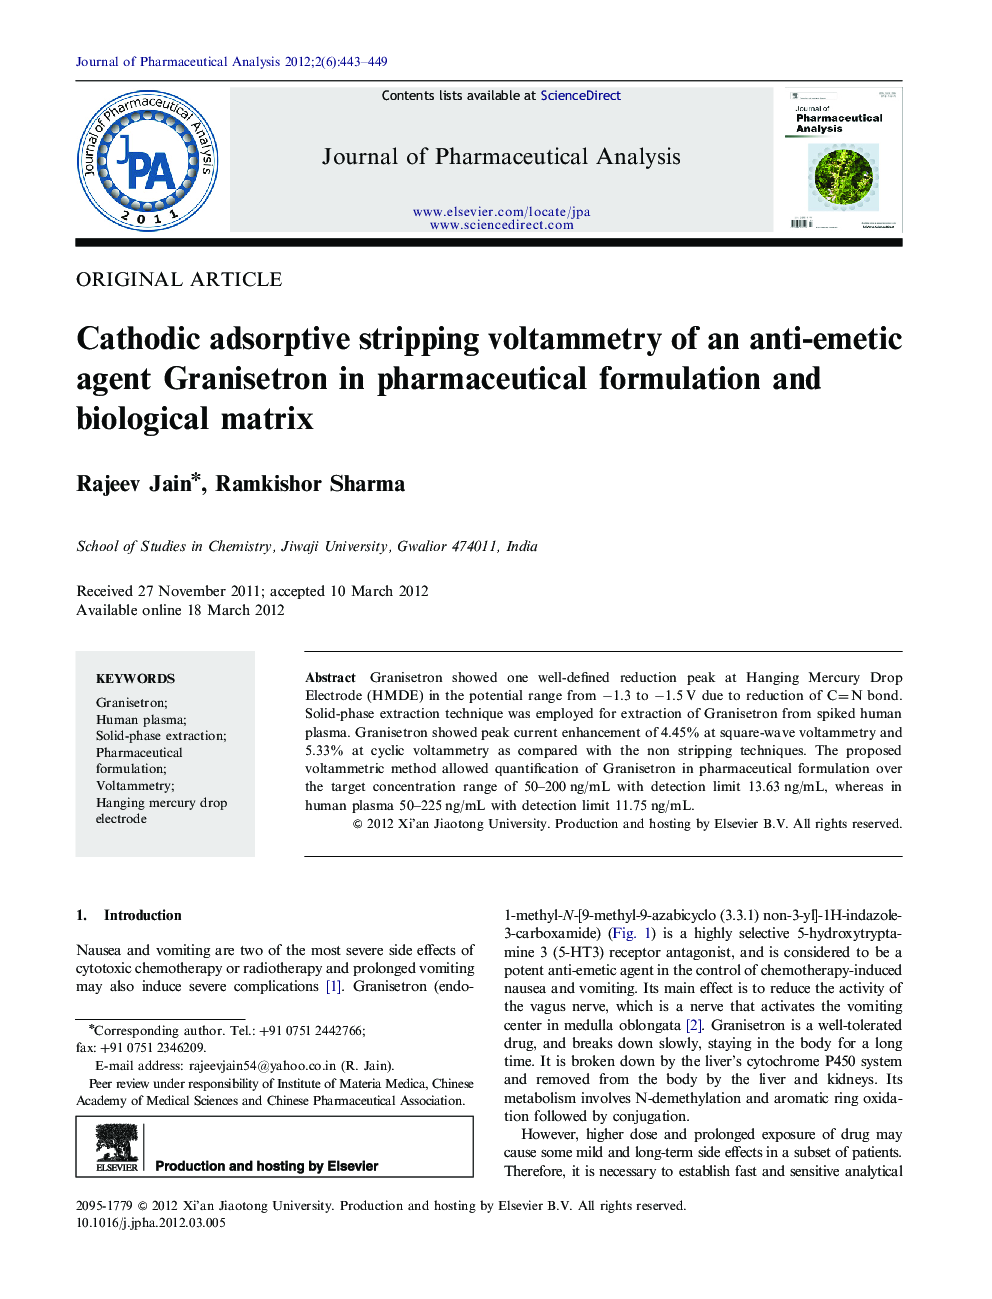 Cathodic adsorptive stripping voltammetry of an anti-emetic agent Granisetron in pharmaceutical formulation and biological matrix 